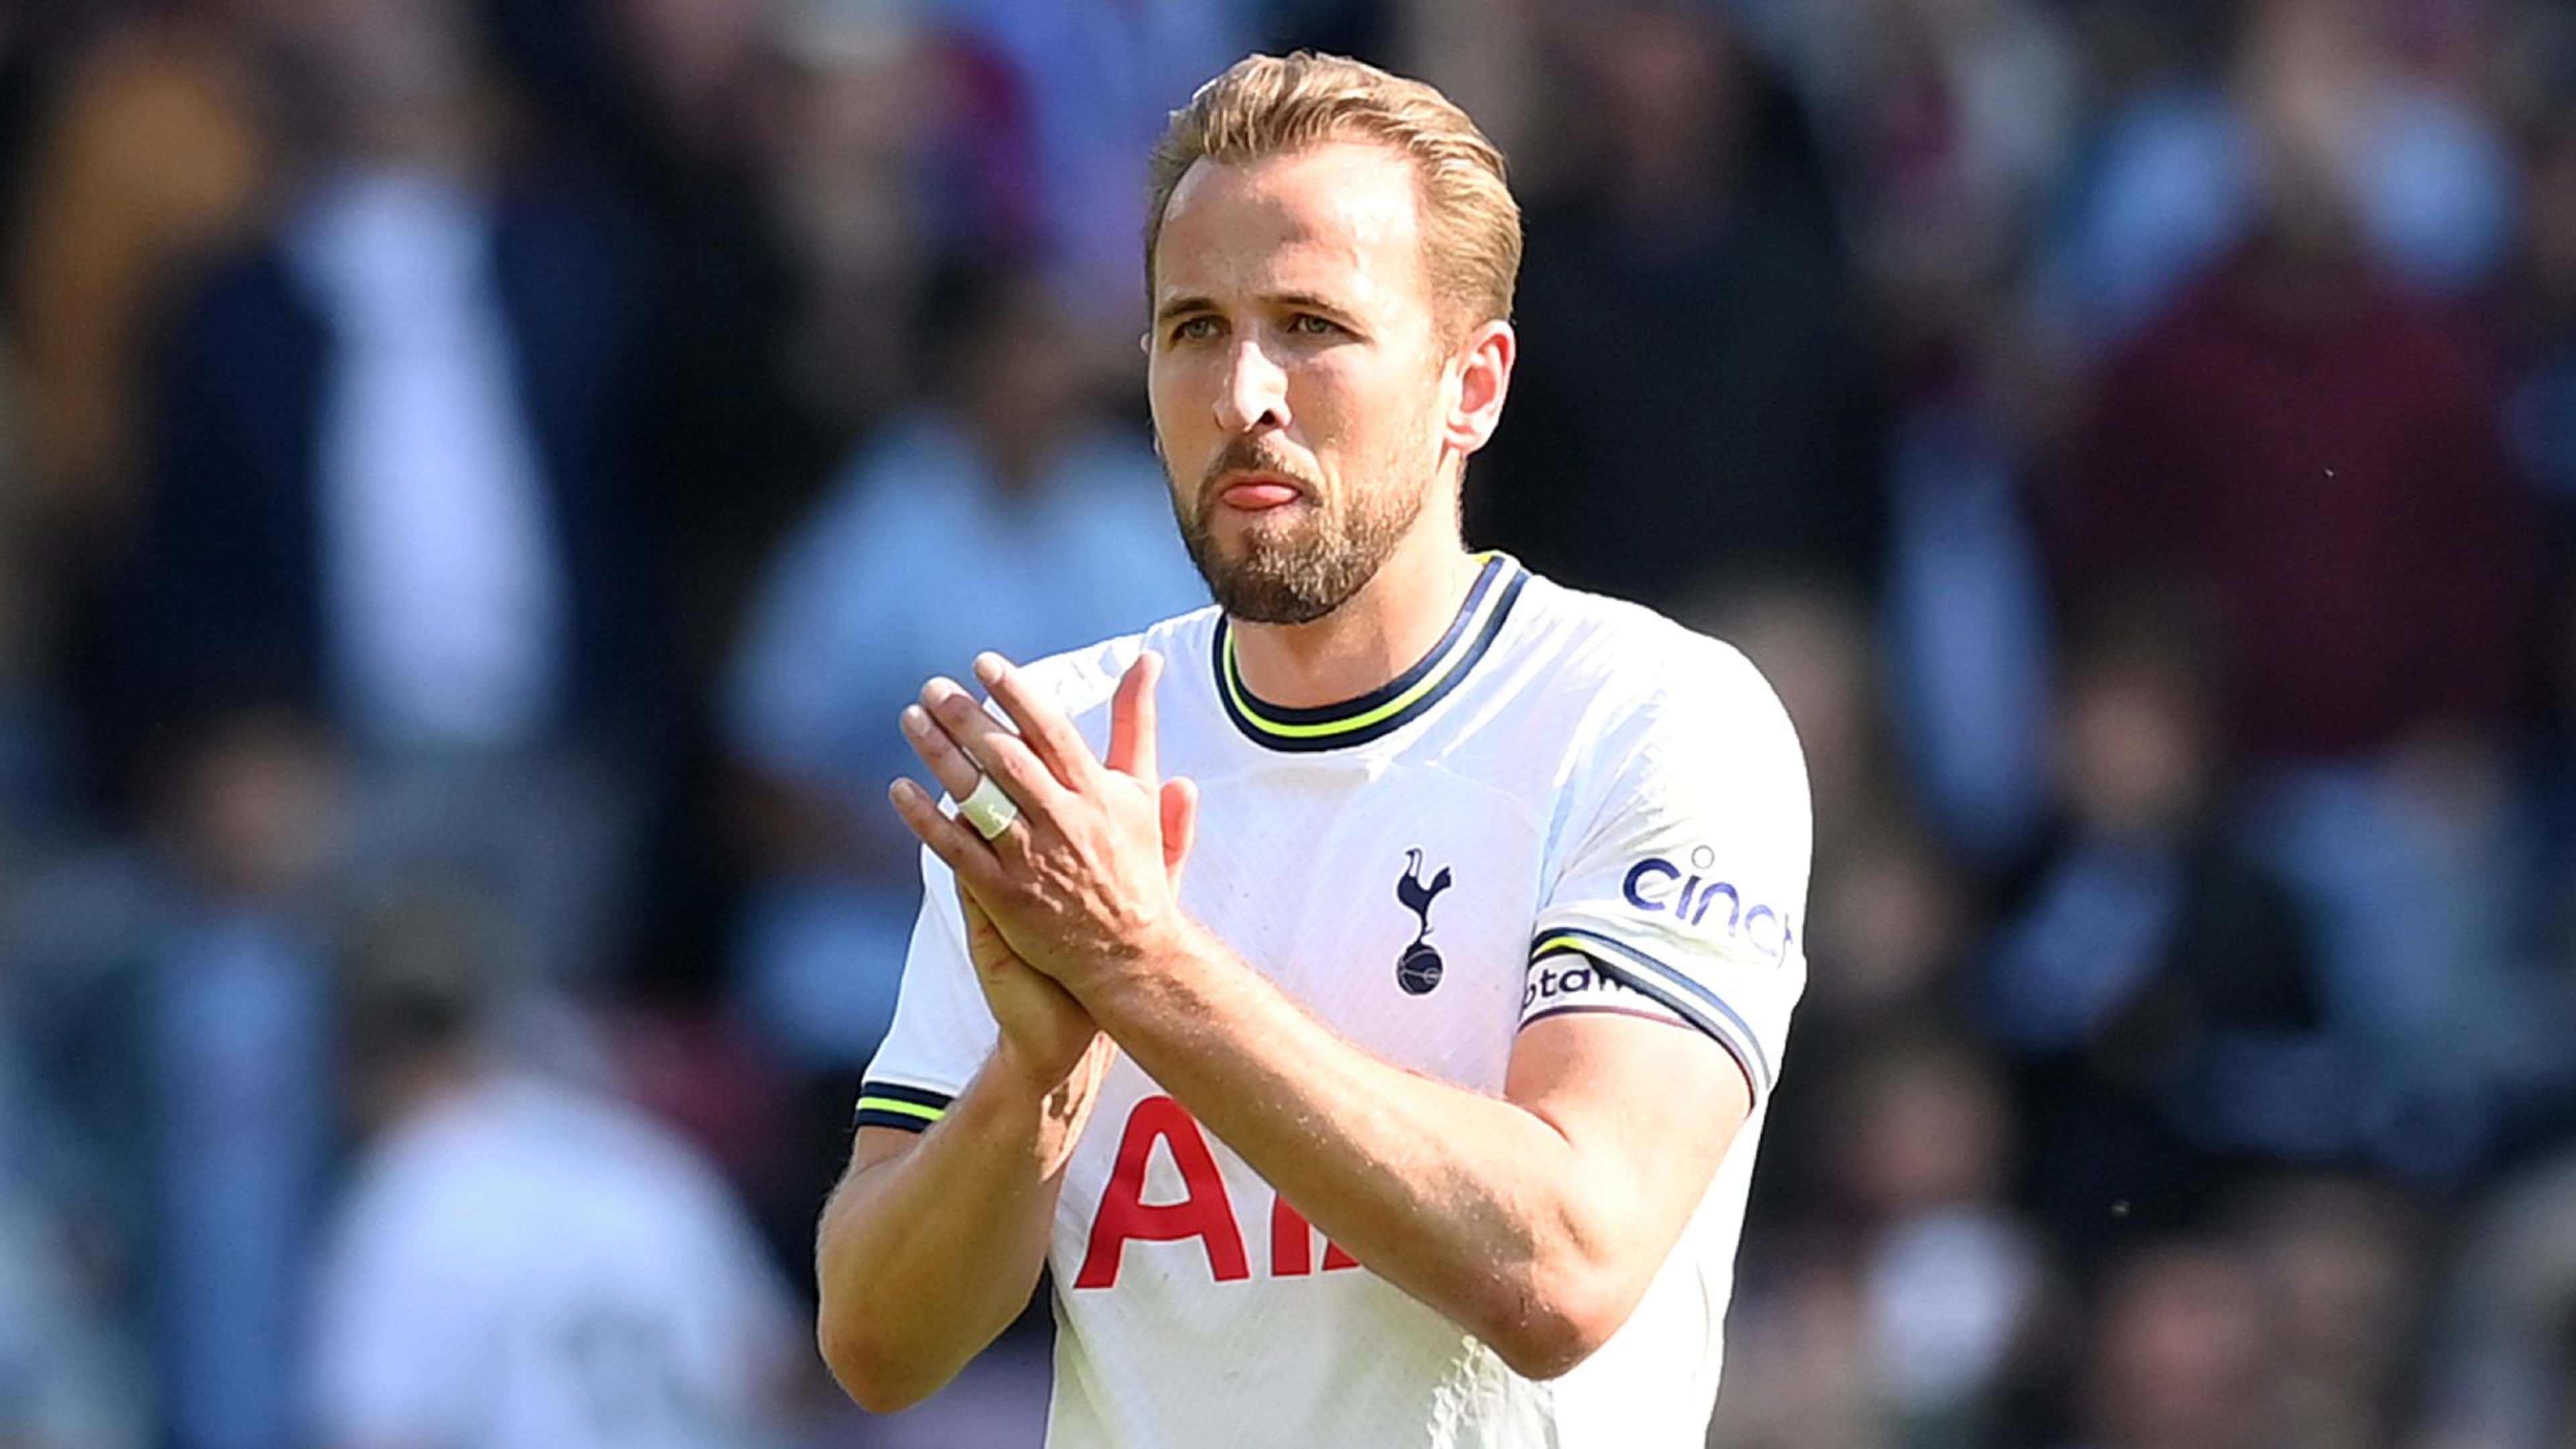 Tottenham finally accept £100m bid for Kane as spur eye last minute world record signing